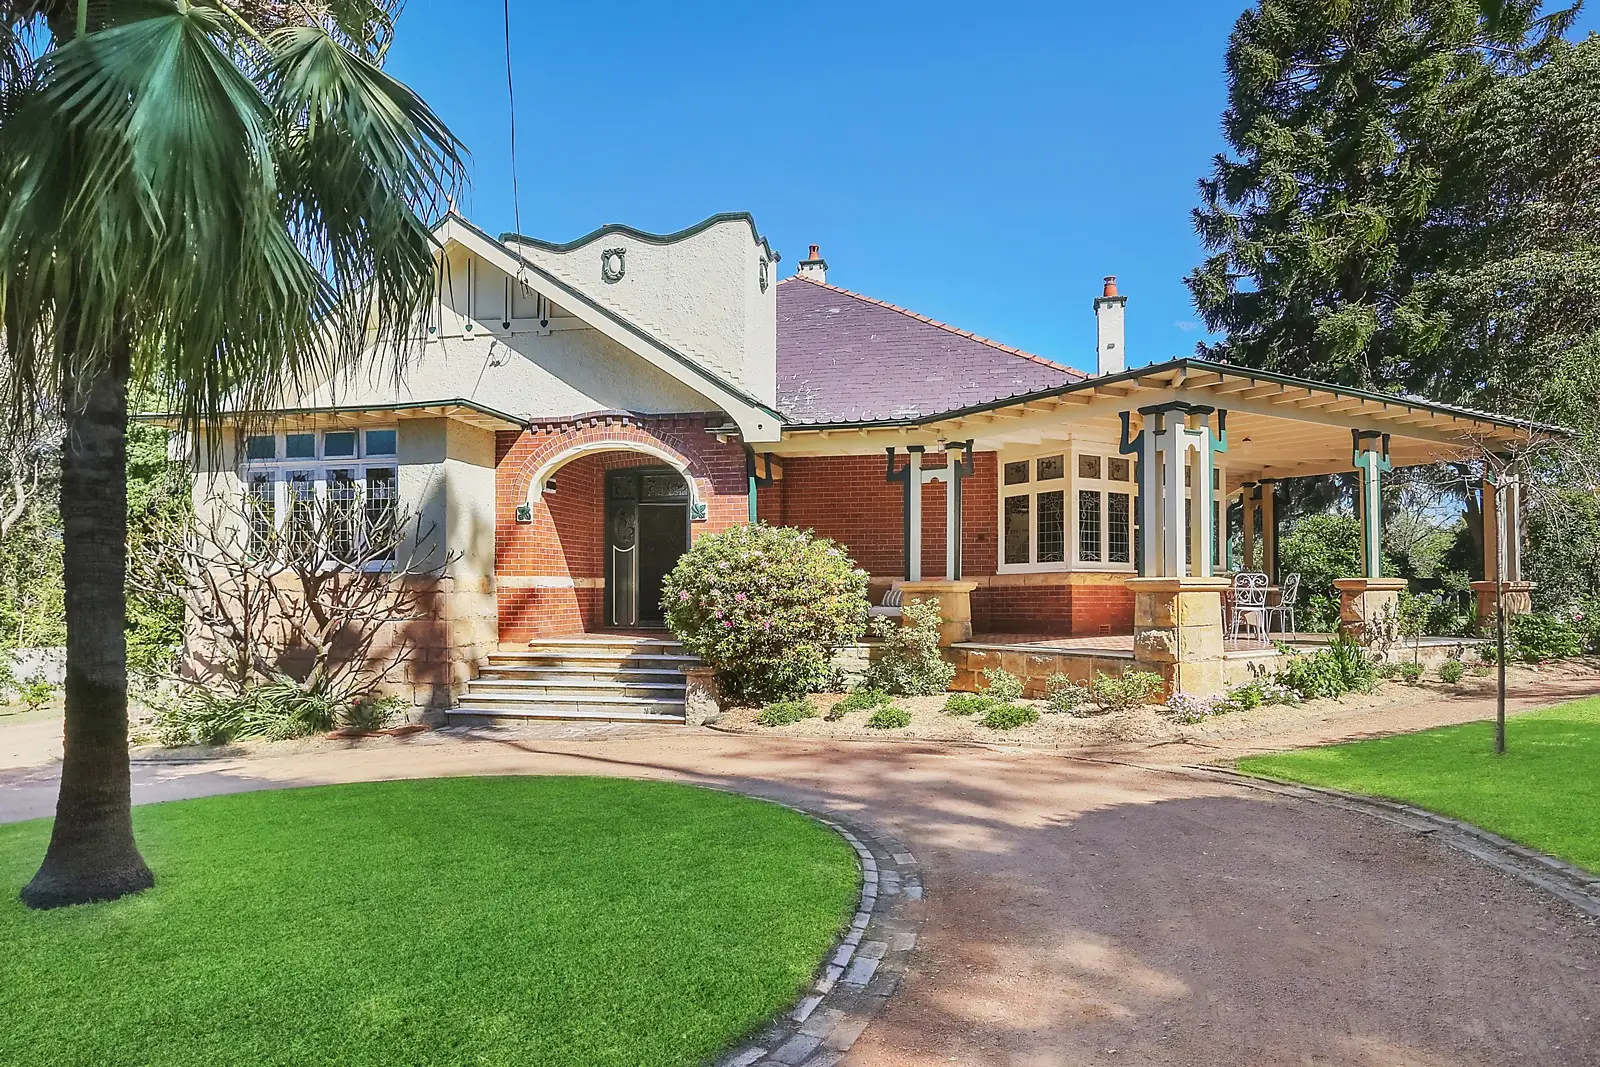 Photo #1: 32 Abuklea Road, Epping - Sold by Sydney Sotheby's International Realty